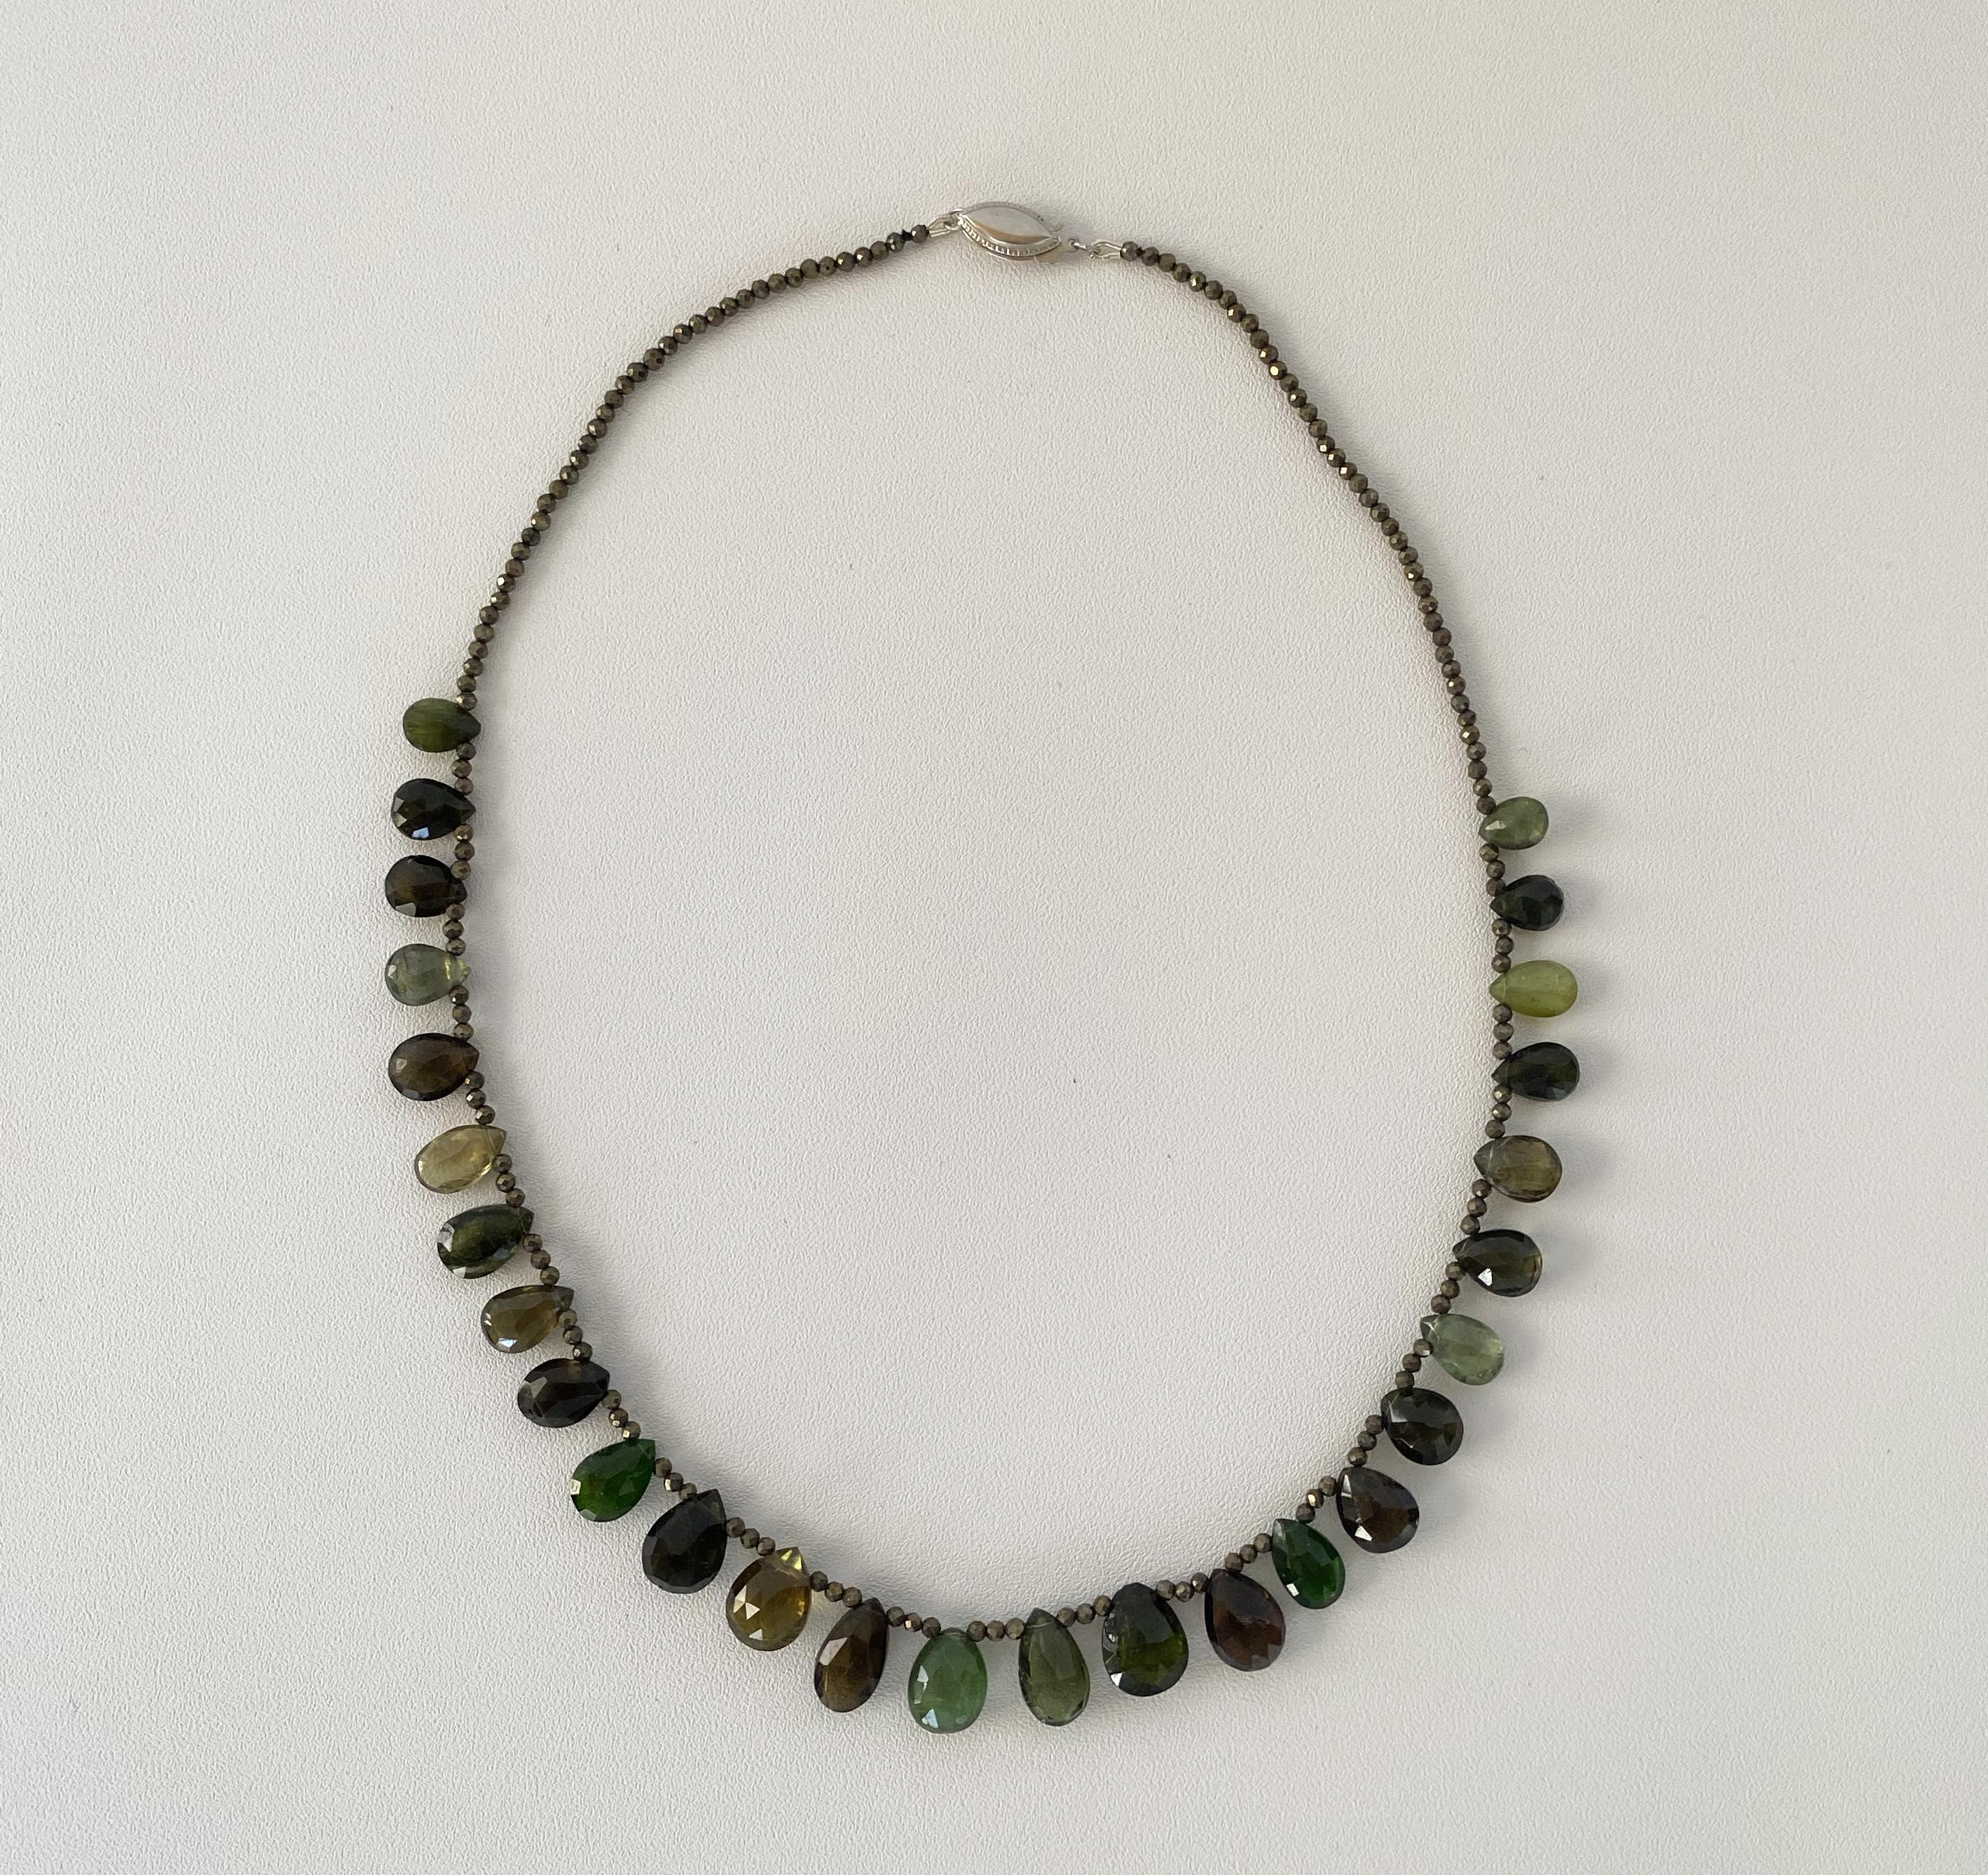 Briolette Cut Marina J. Green Tourmaline Necklace with Iridescent Spinel and Silver Clasp